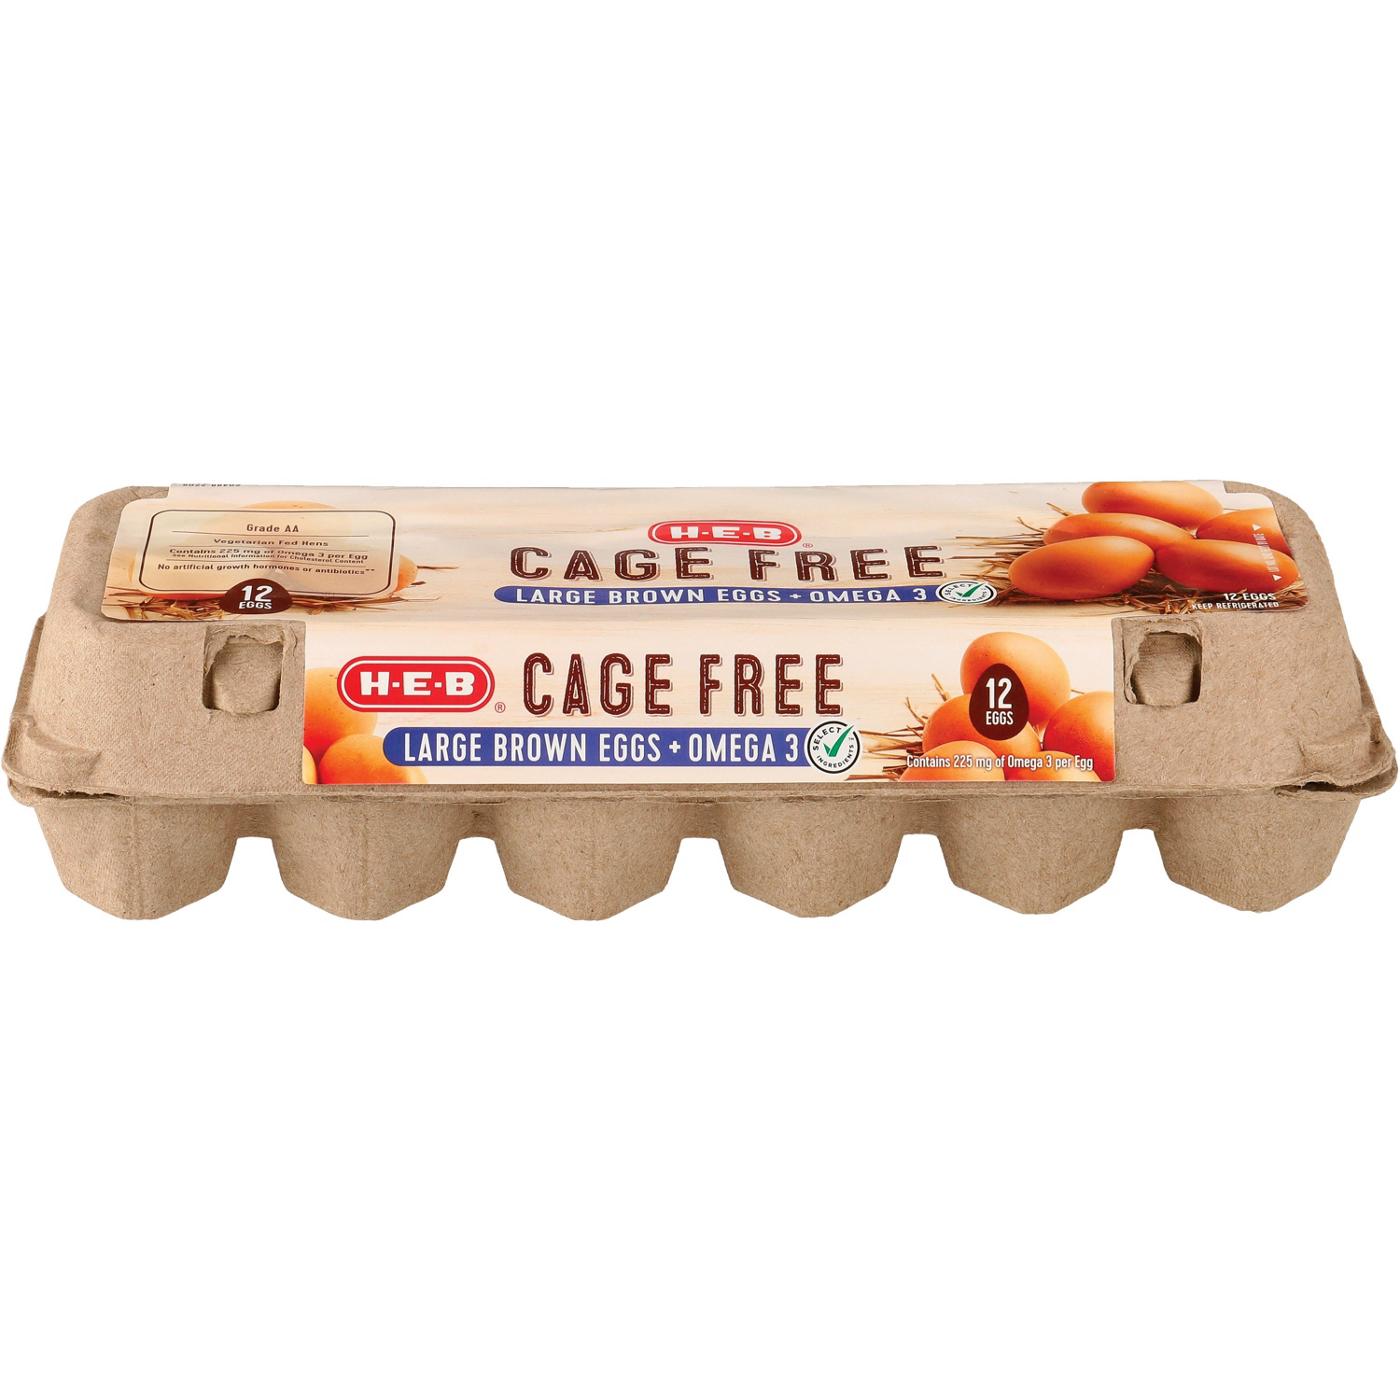 H-E-B Cage Free Omega-3 Grade AA Large Brown Eggs; image 1 of 3